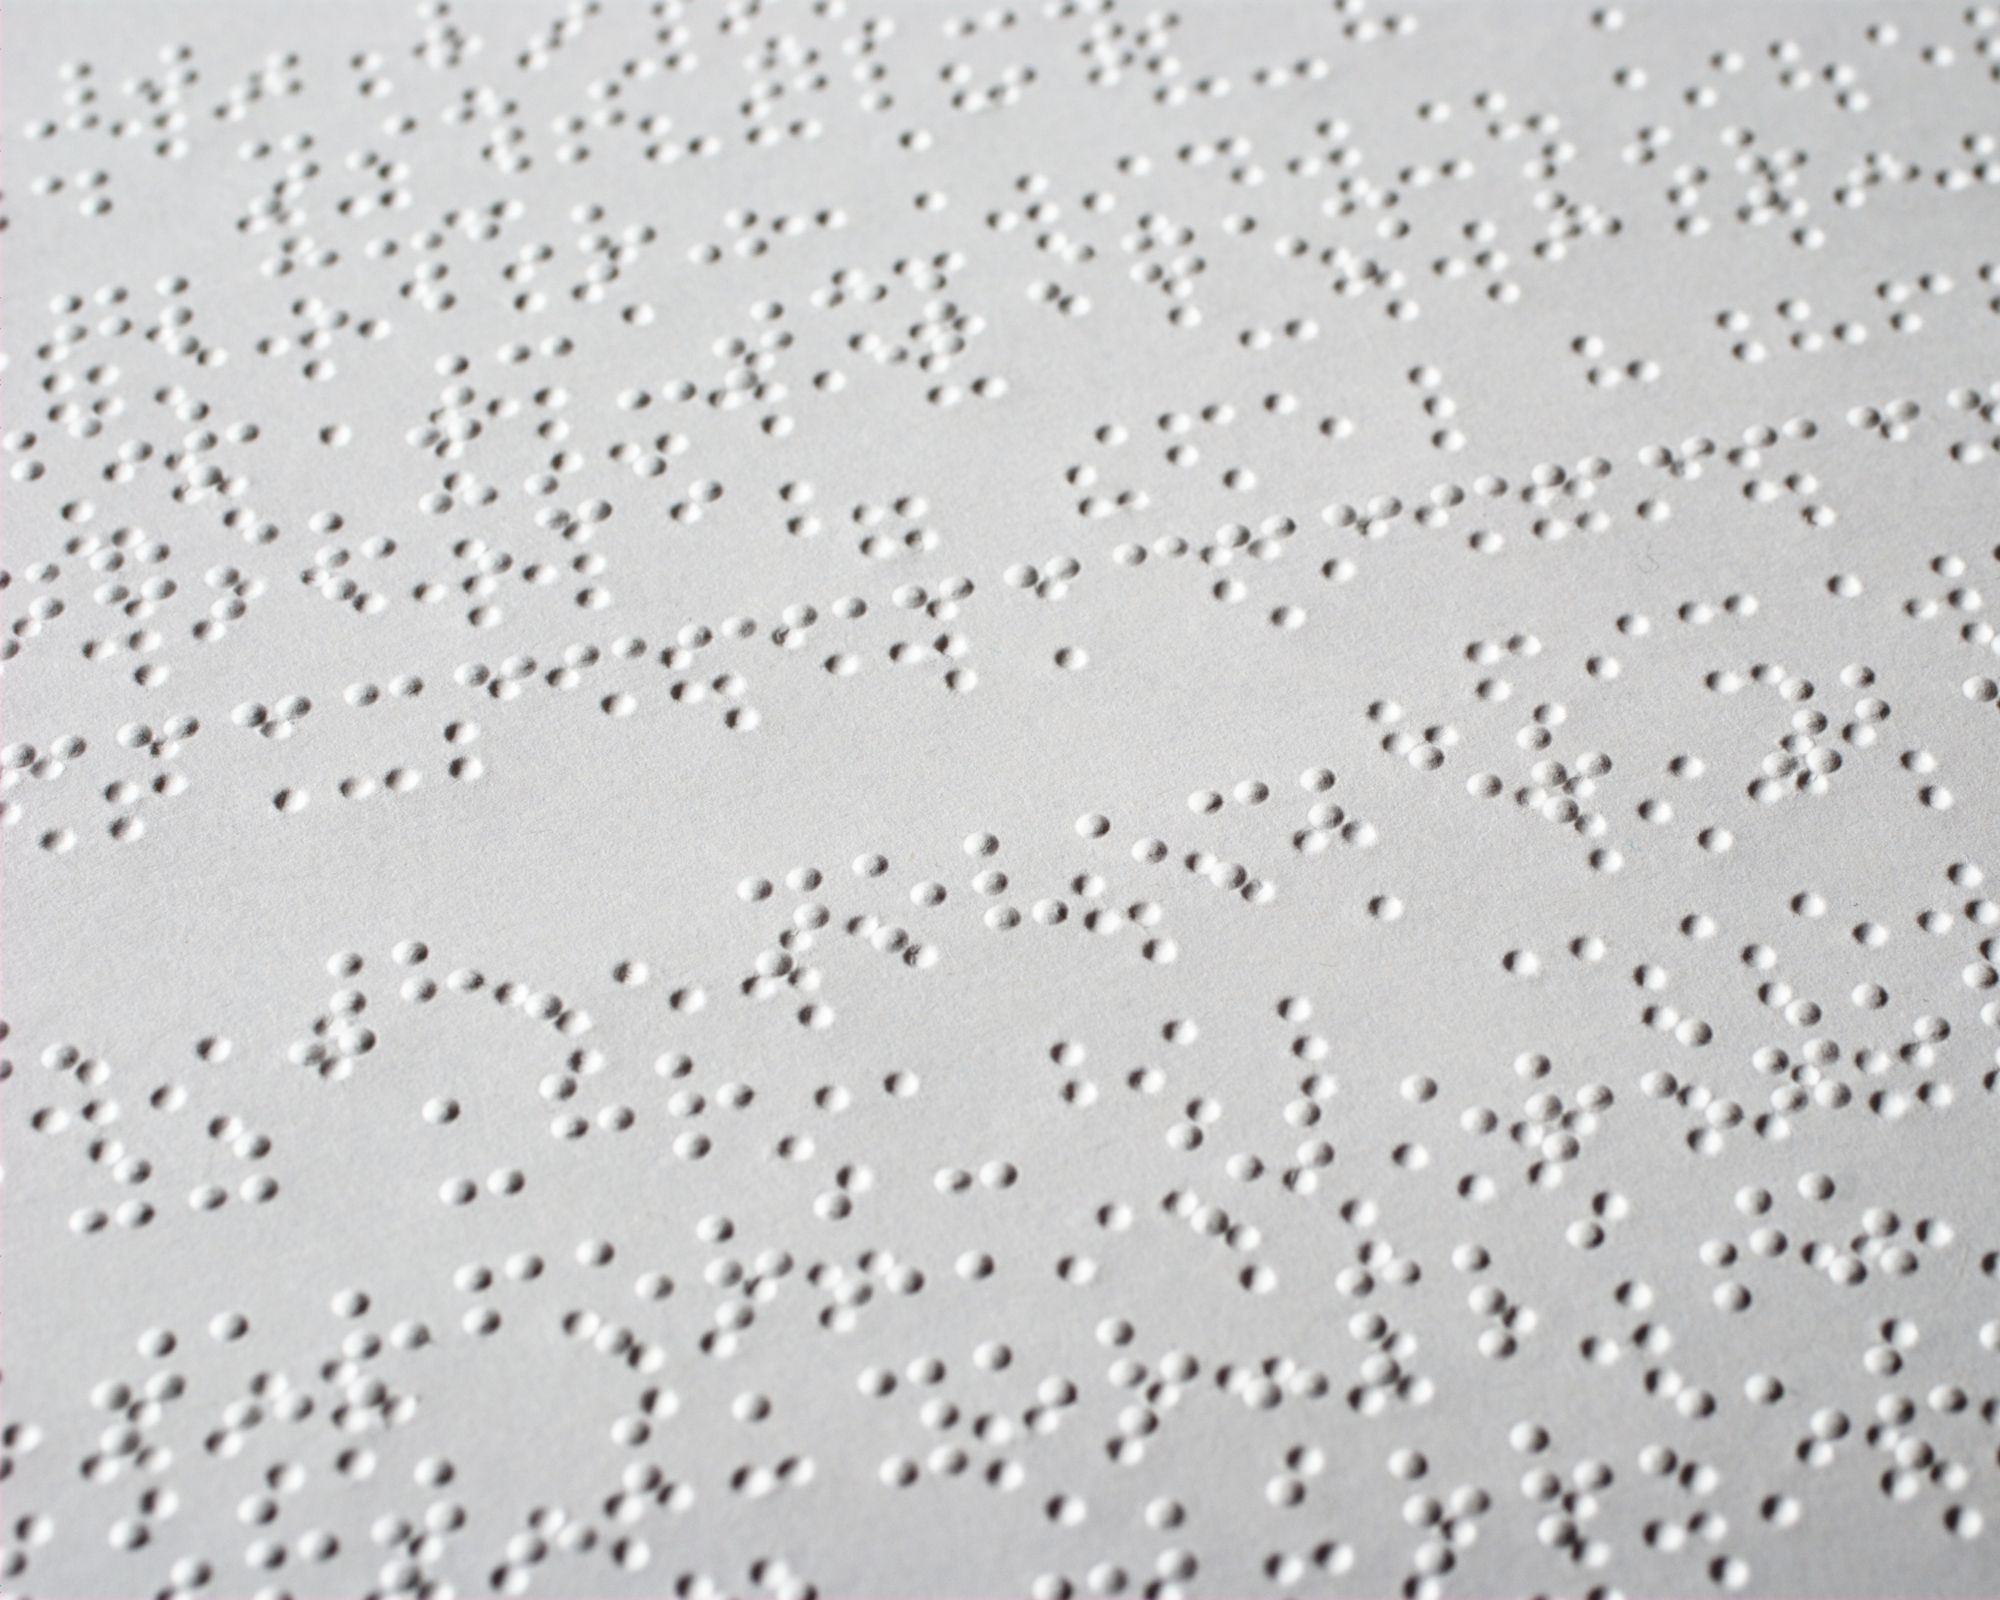 Braille text appears on white paper